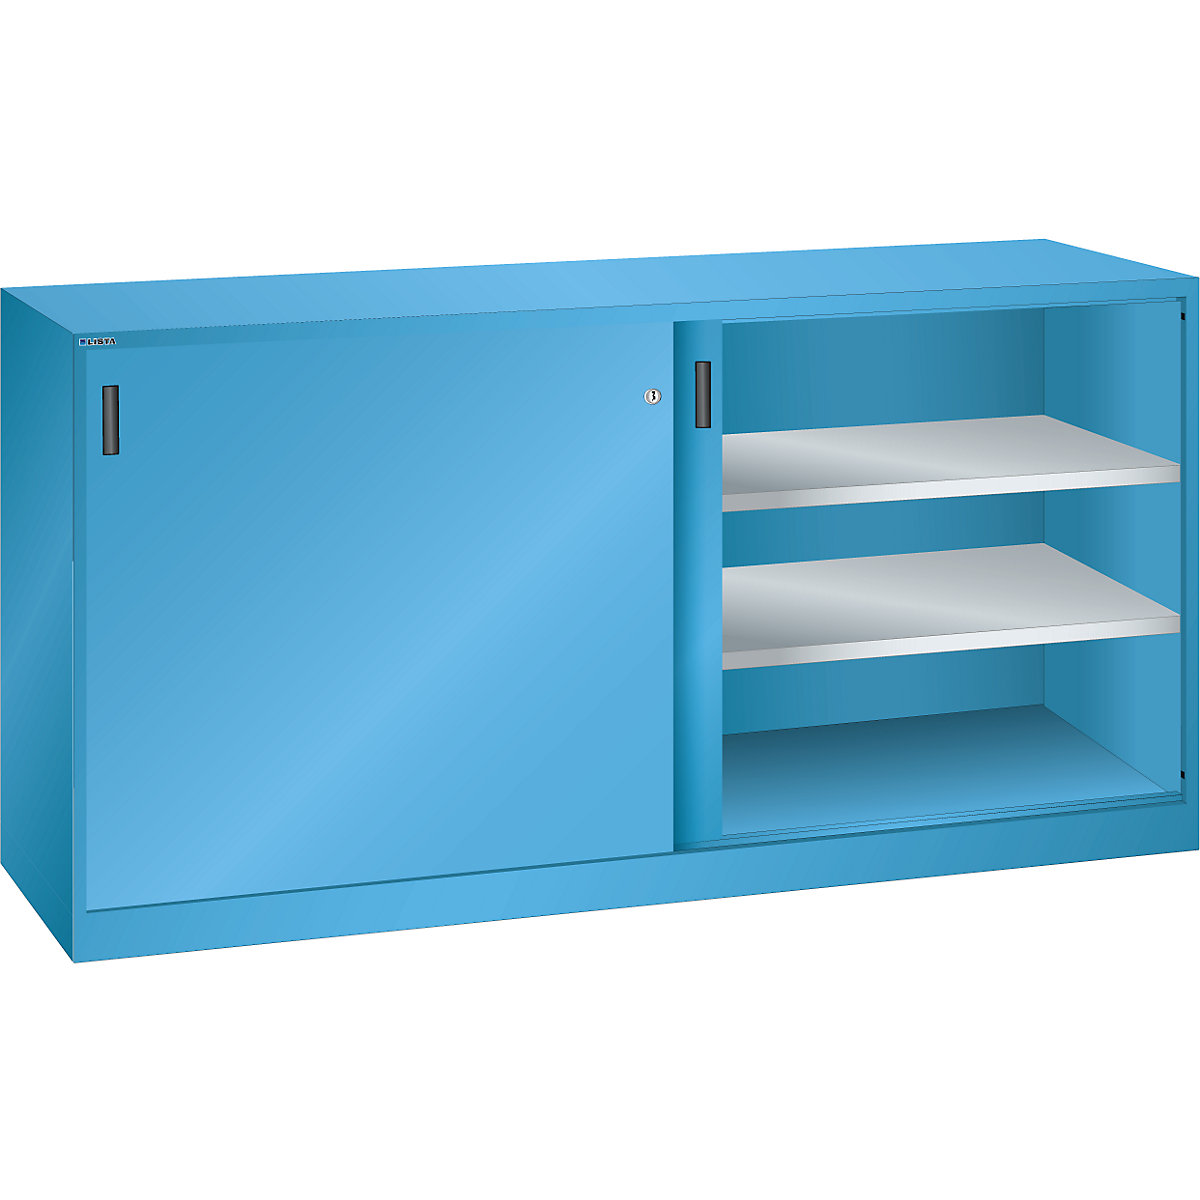 Sliding door cupboard with solid panel doors – LISTA, 2 shelves, 4 pull-out shelves, 2 drawers, light blue-9